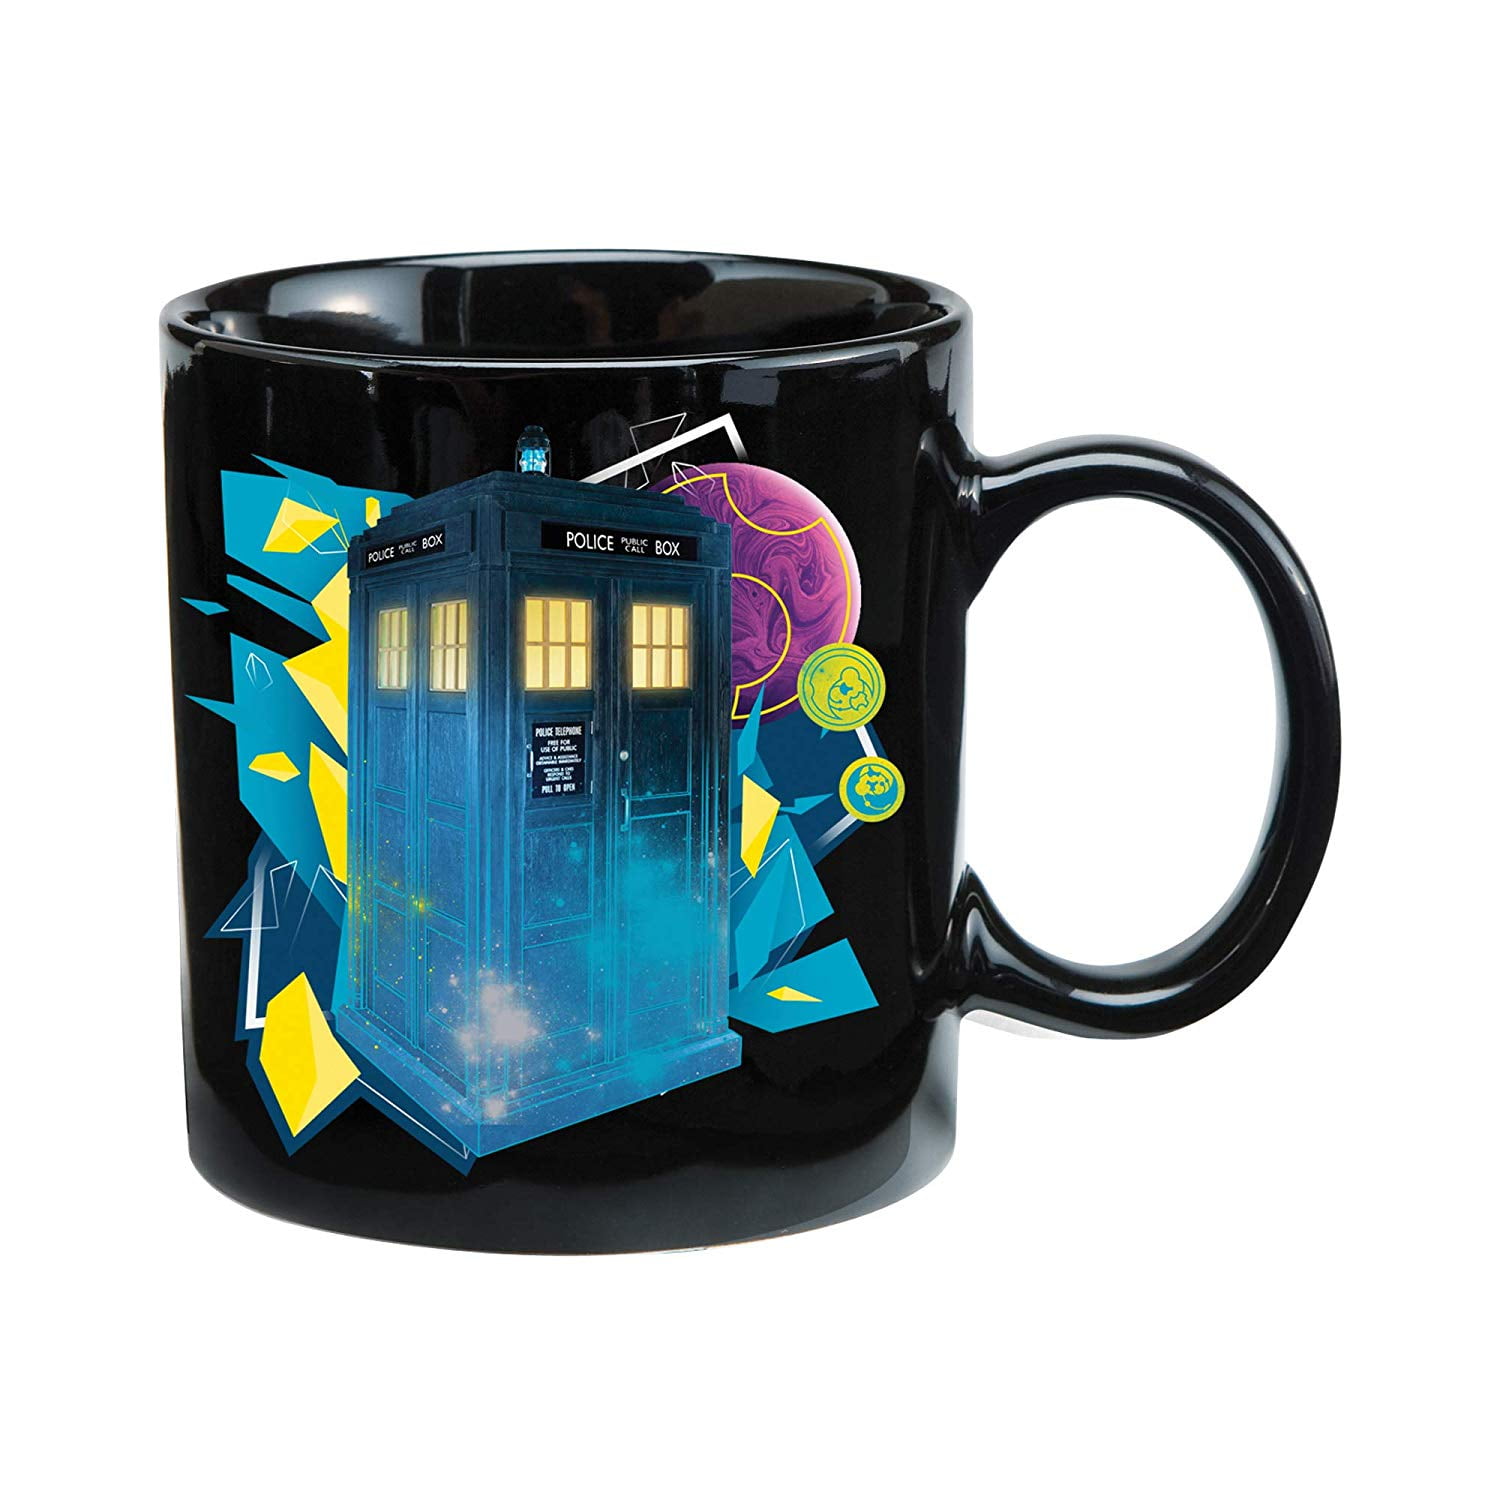 Doctor Who Tardis Magical Colour Changing Mug Image appears when hot 